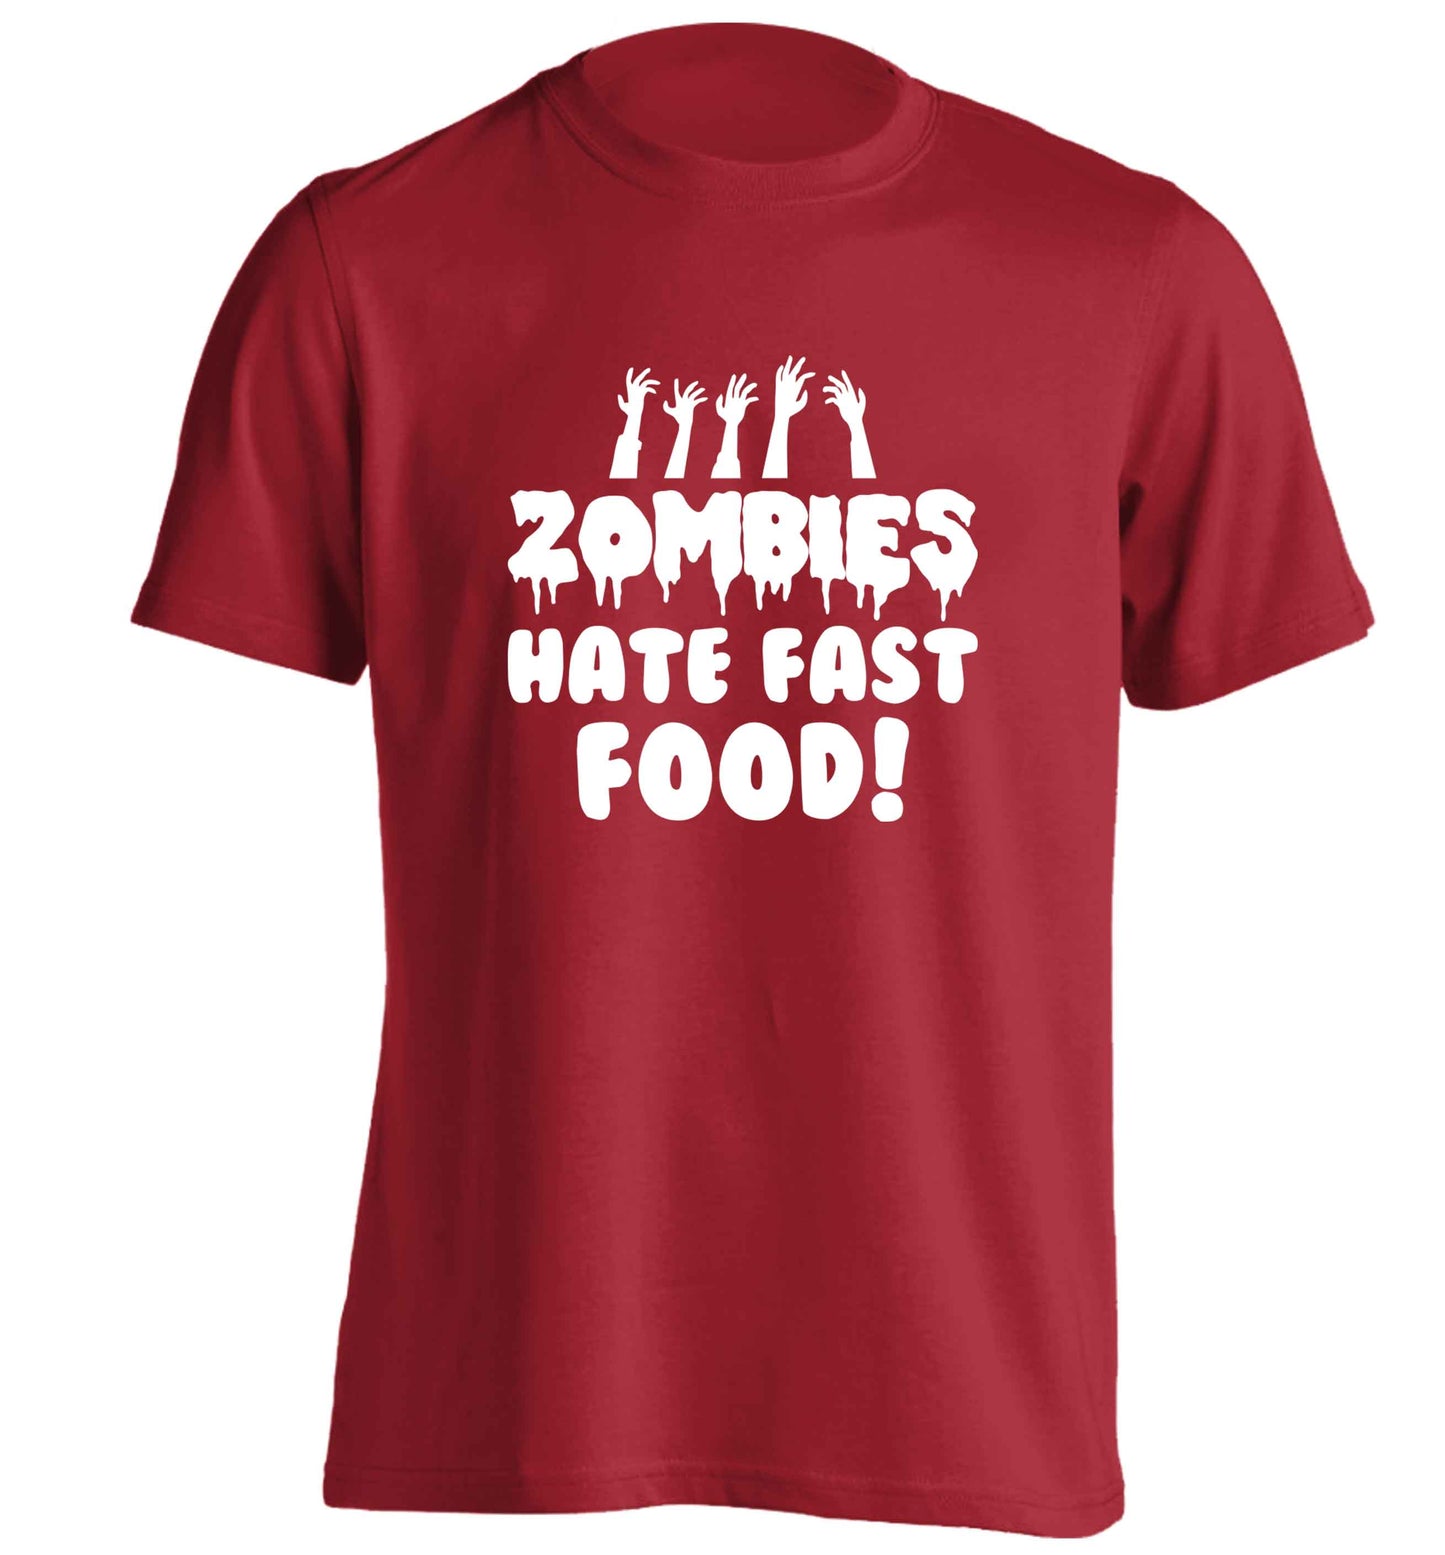 Zombies hate fast food adults unisex red Tshirt 2XL